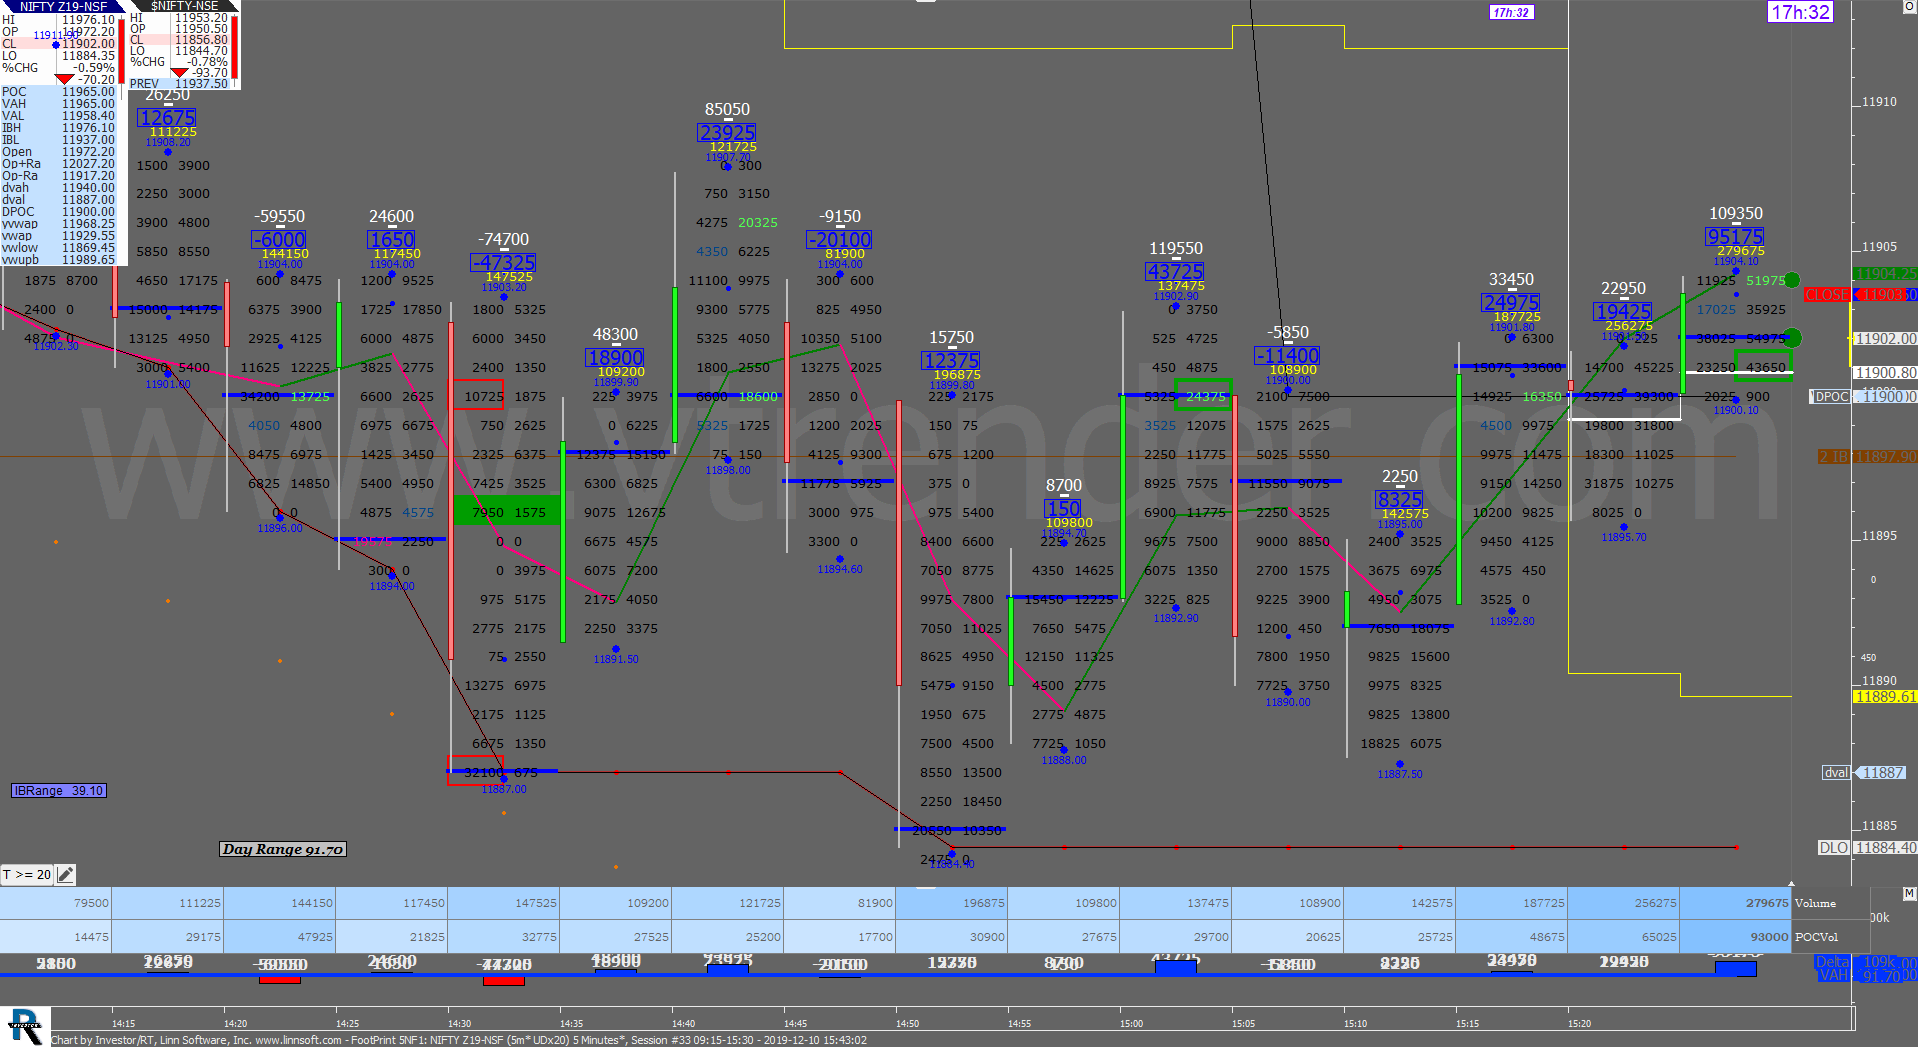 5 12 Order Flow Charts Dated 10Th Dec (5 Mins) Banknifty Futures, Day Trading, Intraday Trading, Intraday Trading Strategies, Nifty Futures, Order Flow Analysis, Support And Resistance, Trading Strategies, Volume Profile Trading